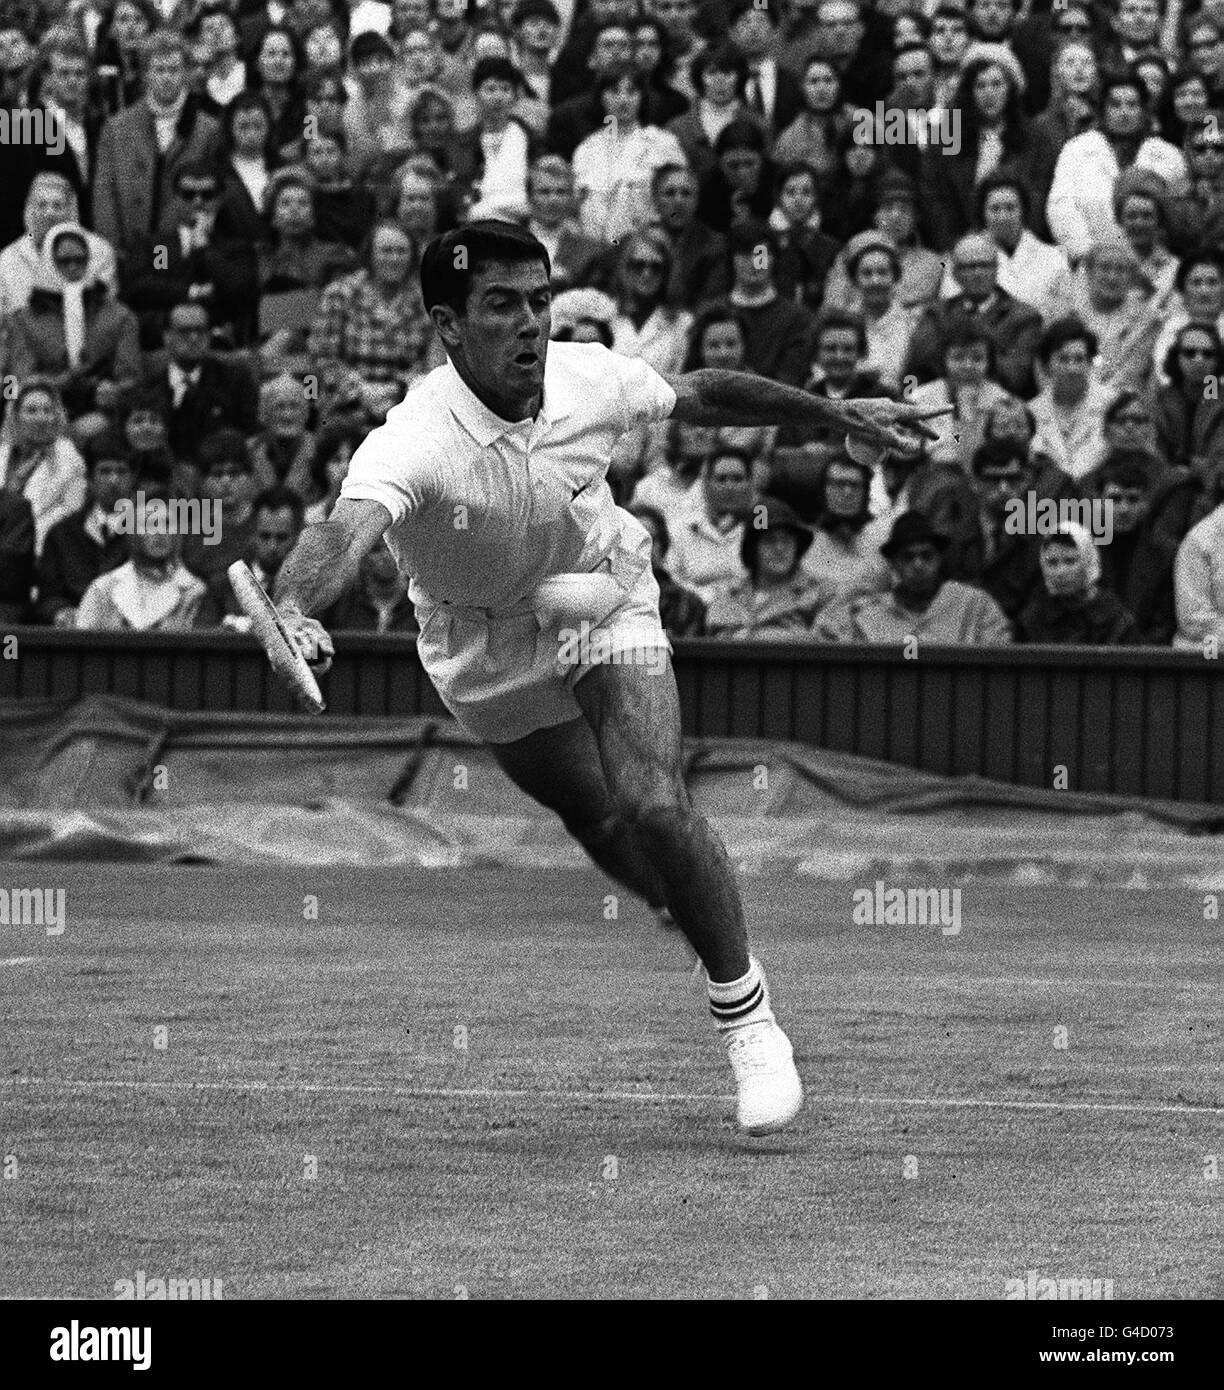 PA NEWS PHOTO 27/6/68 AUSTRALIA'S KEN ROSEWALL ON CENTRE COURT IN THE MEN'S SINGLES OF THE WIMBLEDON TENNIS CHAMPIONSHIPS Stock Photo